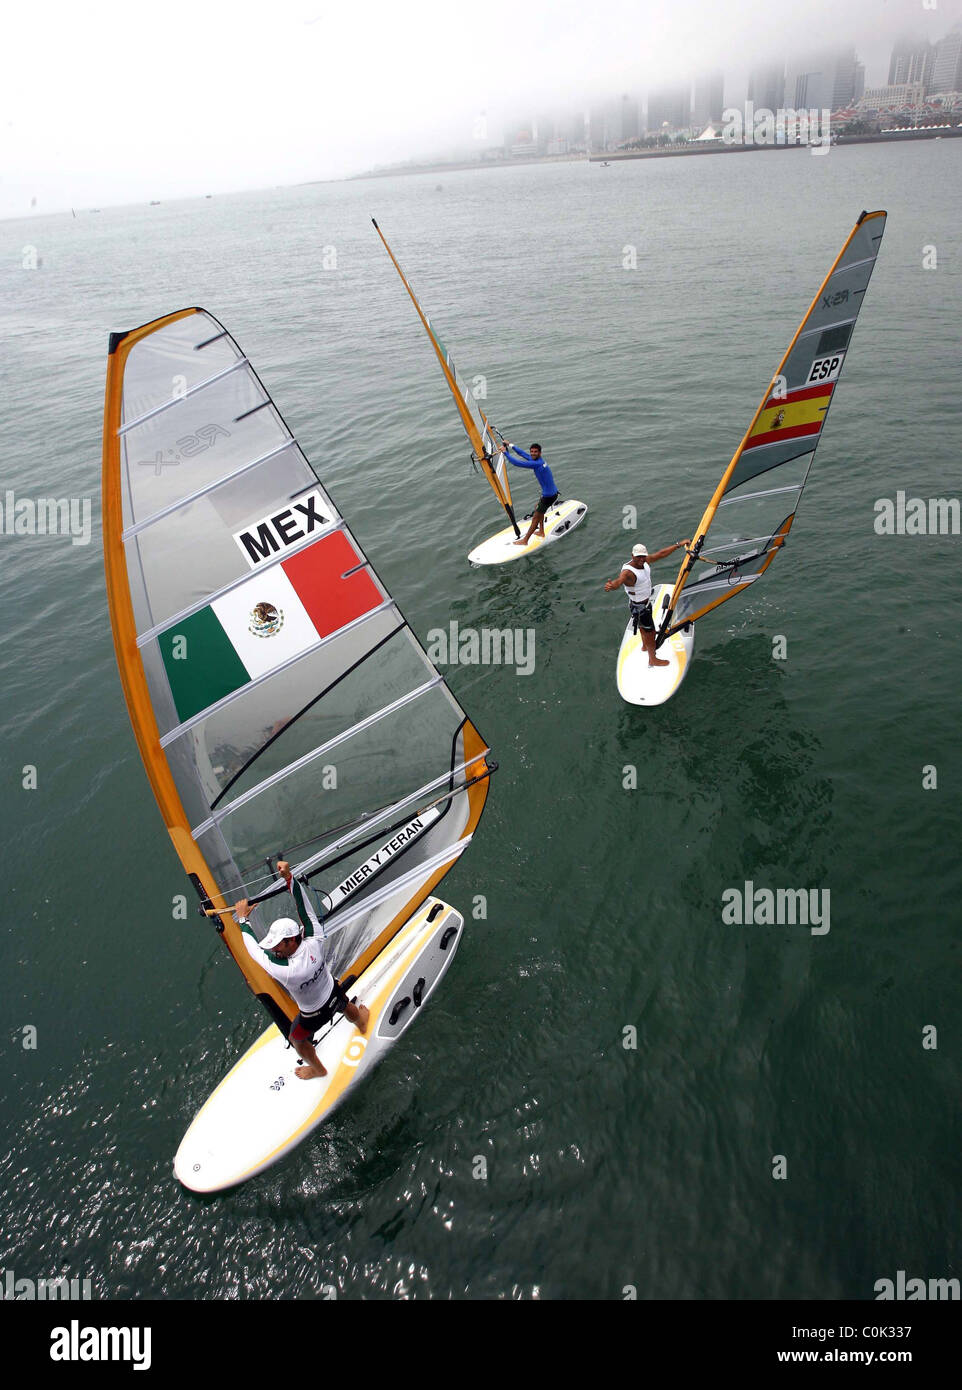 Sailing competitors make preparations for the upcoming Olympic sailing events at the Qingdao Olympic Sailing Center, Qingdao, Stock Photo